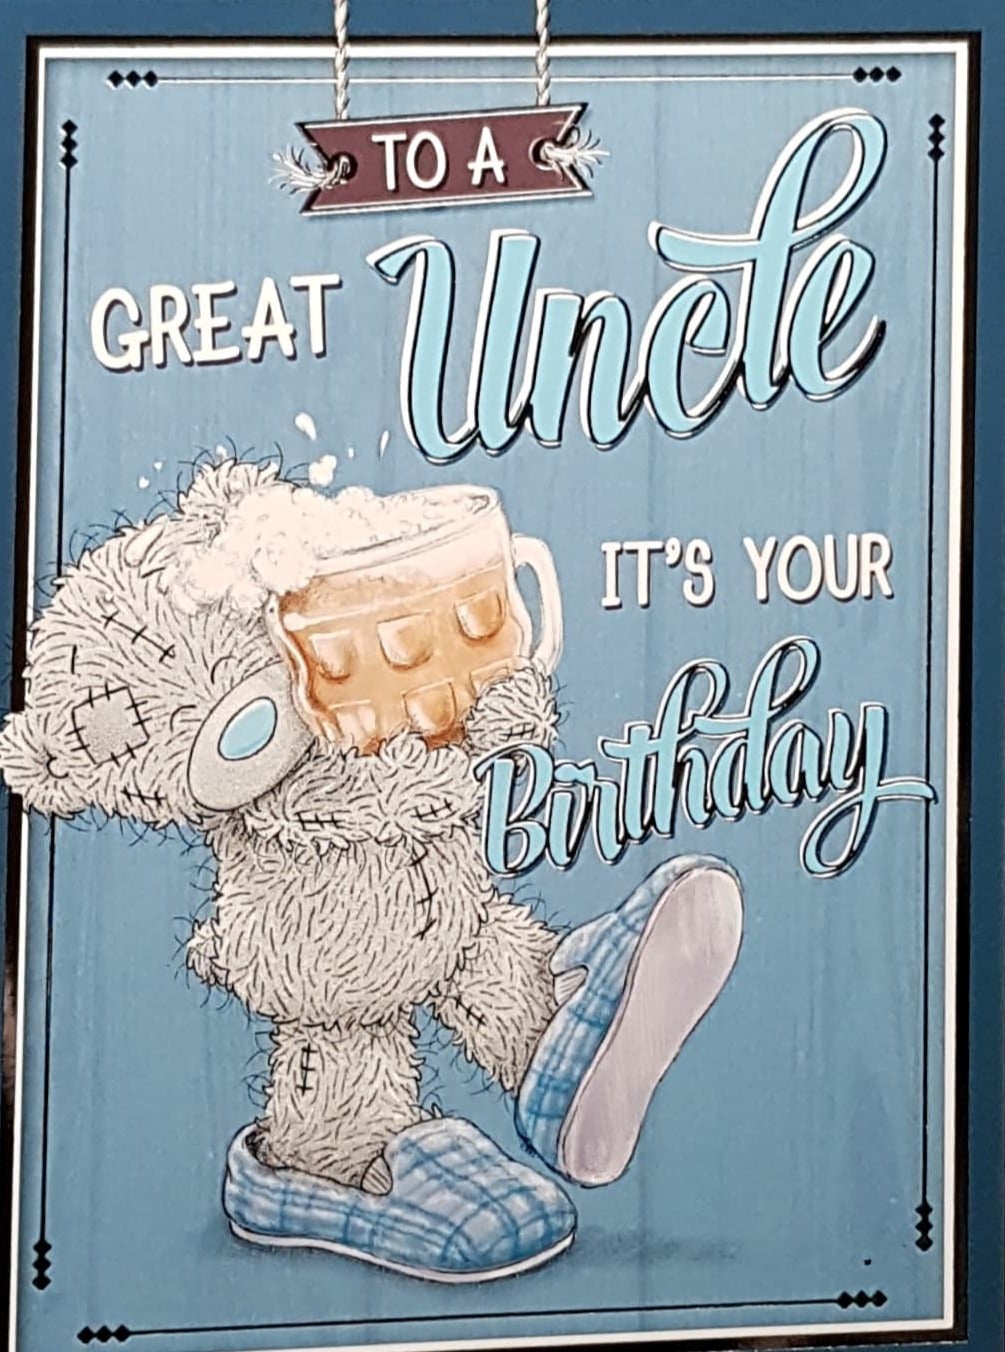 Birthday Card - Great Uncle / Teddy In Big Blue Slippers Carrying Beverage